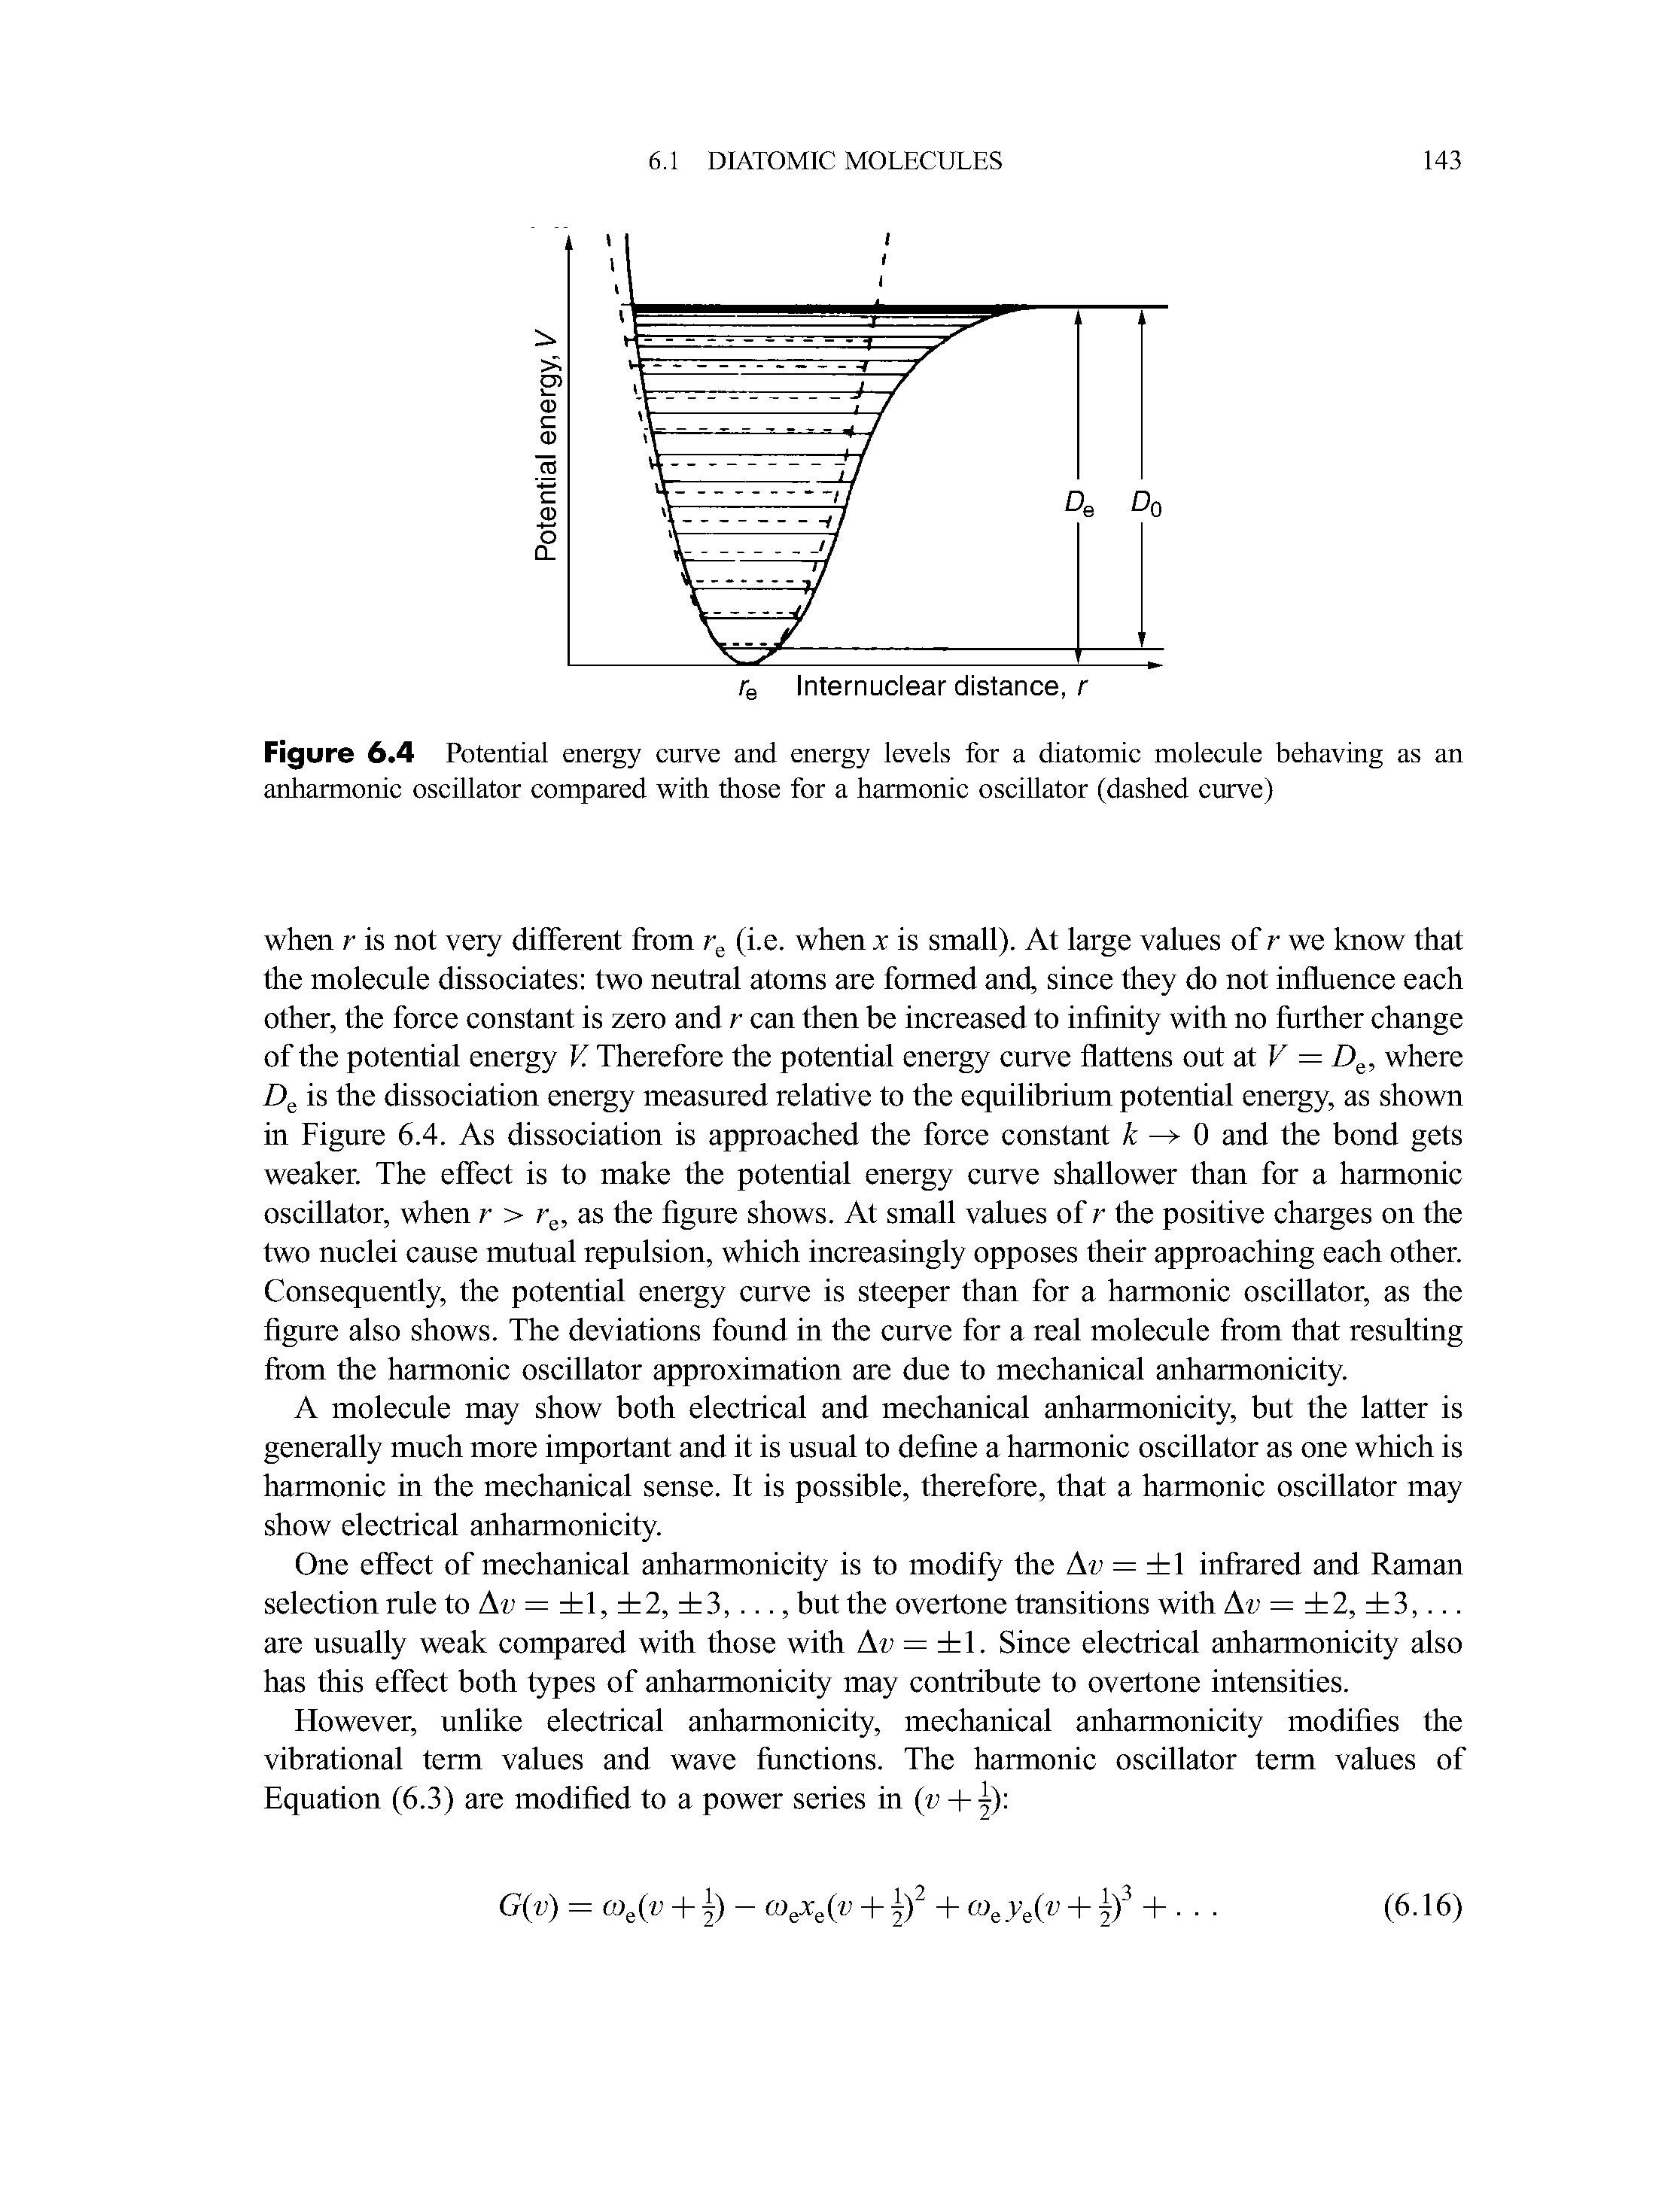 Figure 6.4 Potential energy curve and energy levels for a diatomic molecule behaving as an anharmonic oscillator compared with those for a harmonic oscillator (dashed curve)...